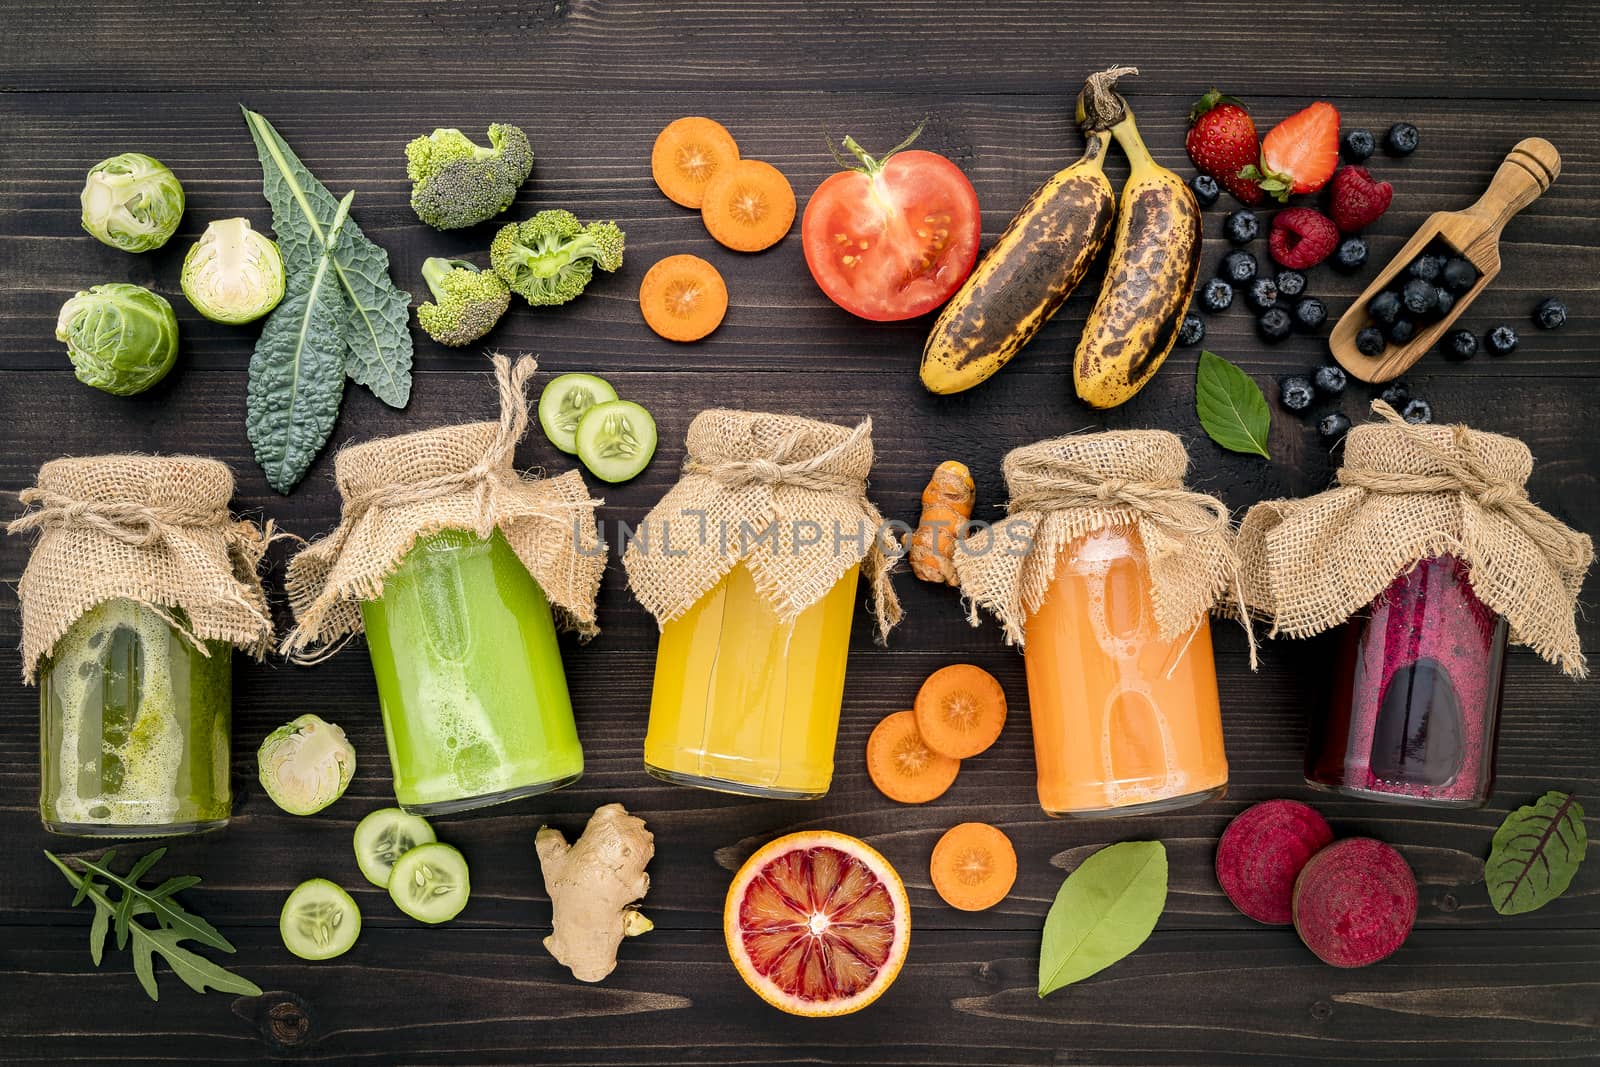 Colourful healthy smoothies and juices in bottles with fresh tropical fruit and superfoods on wooden background.